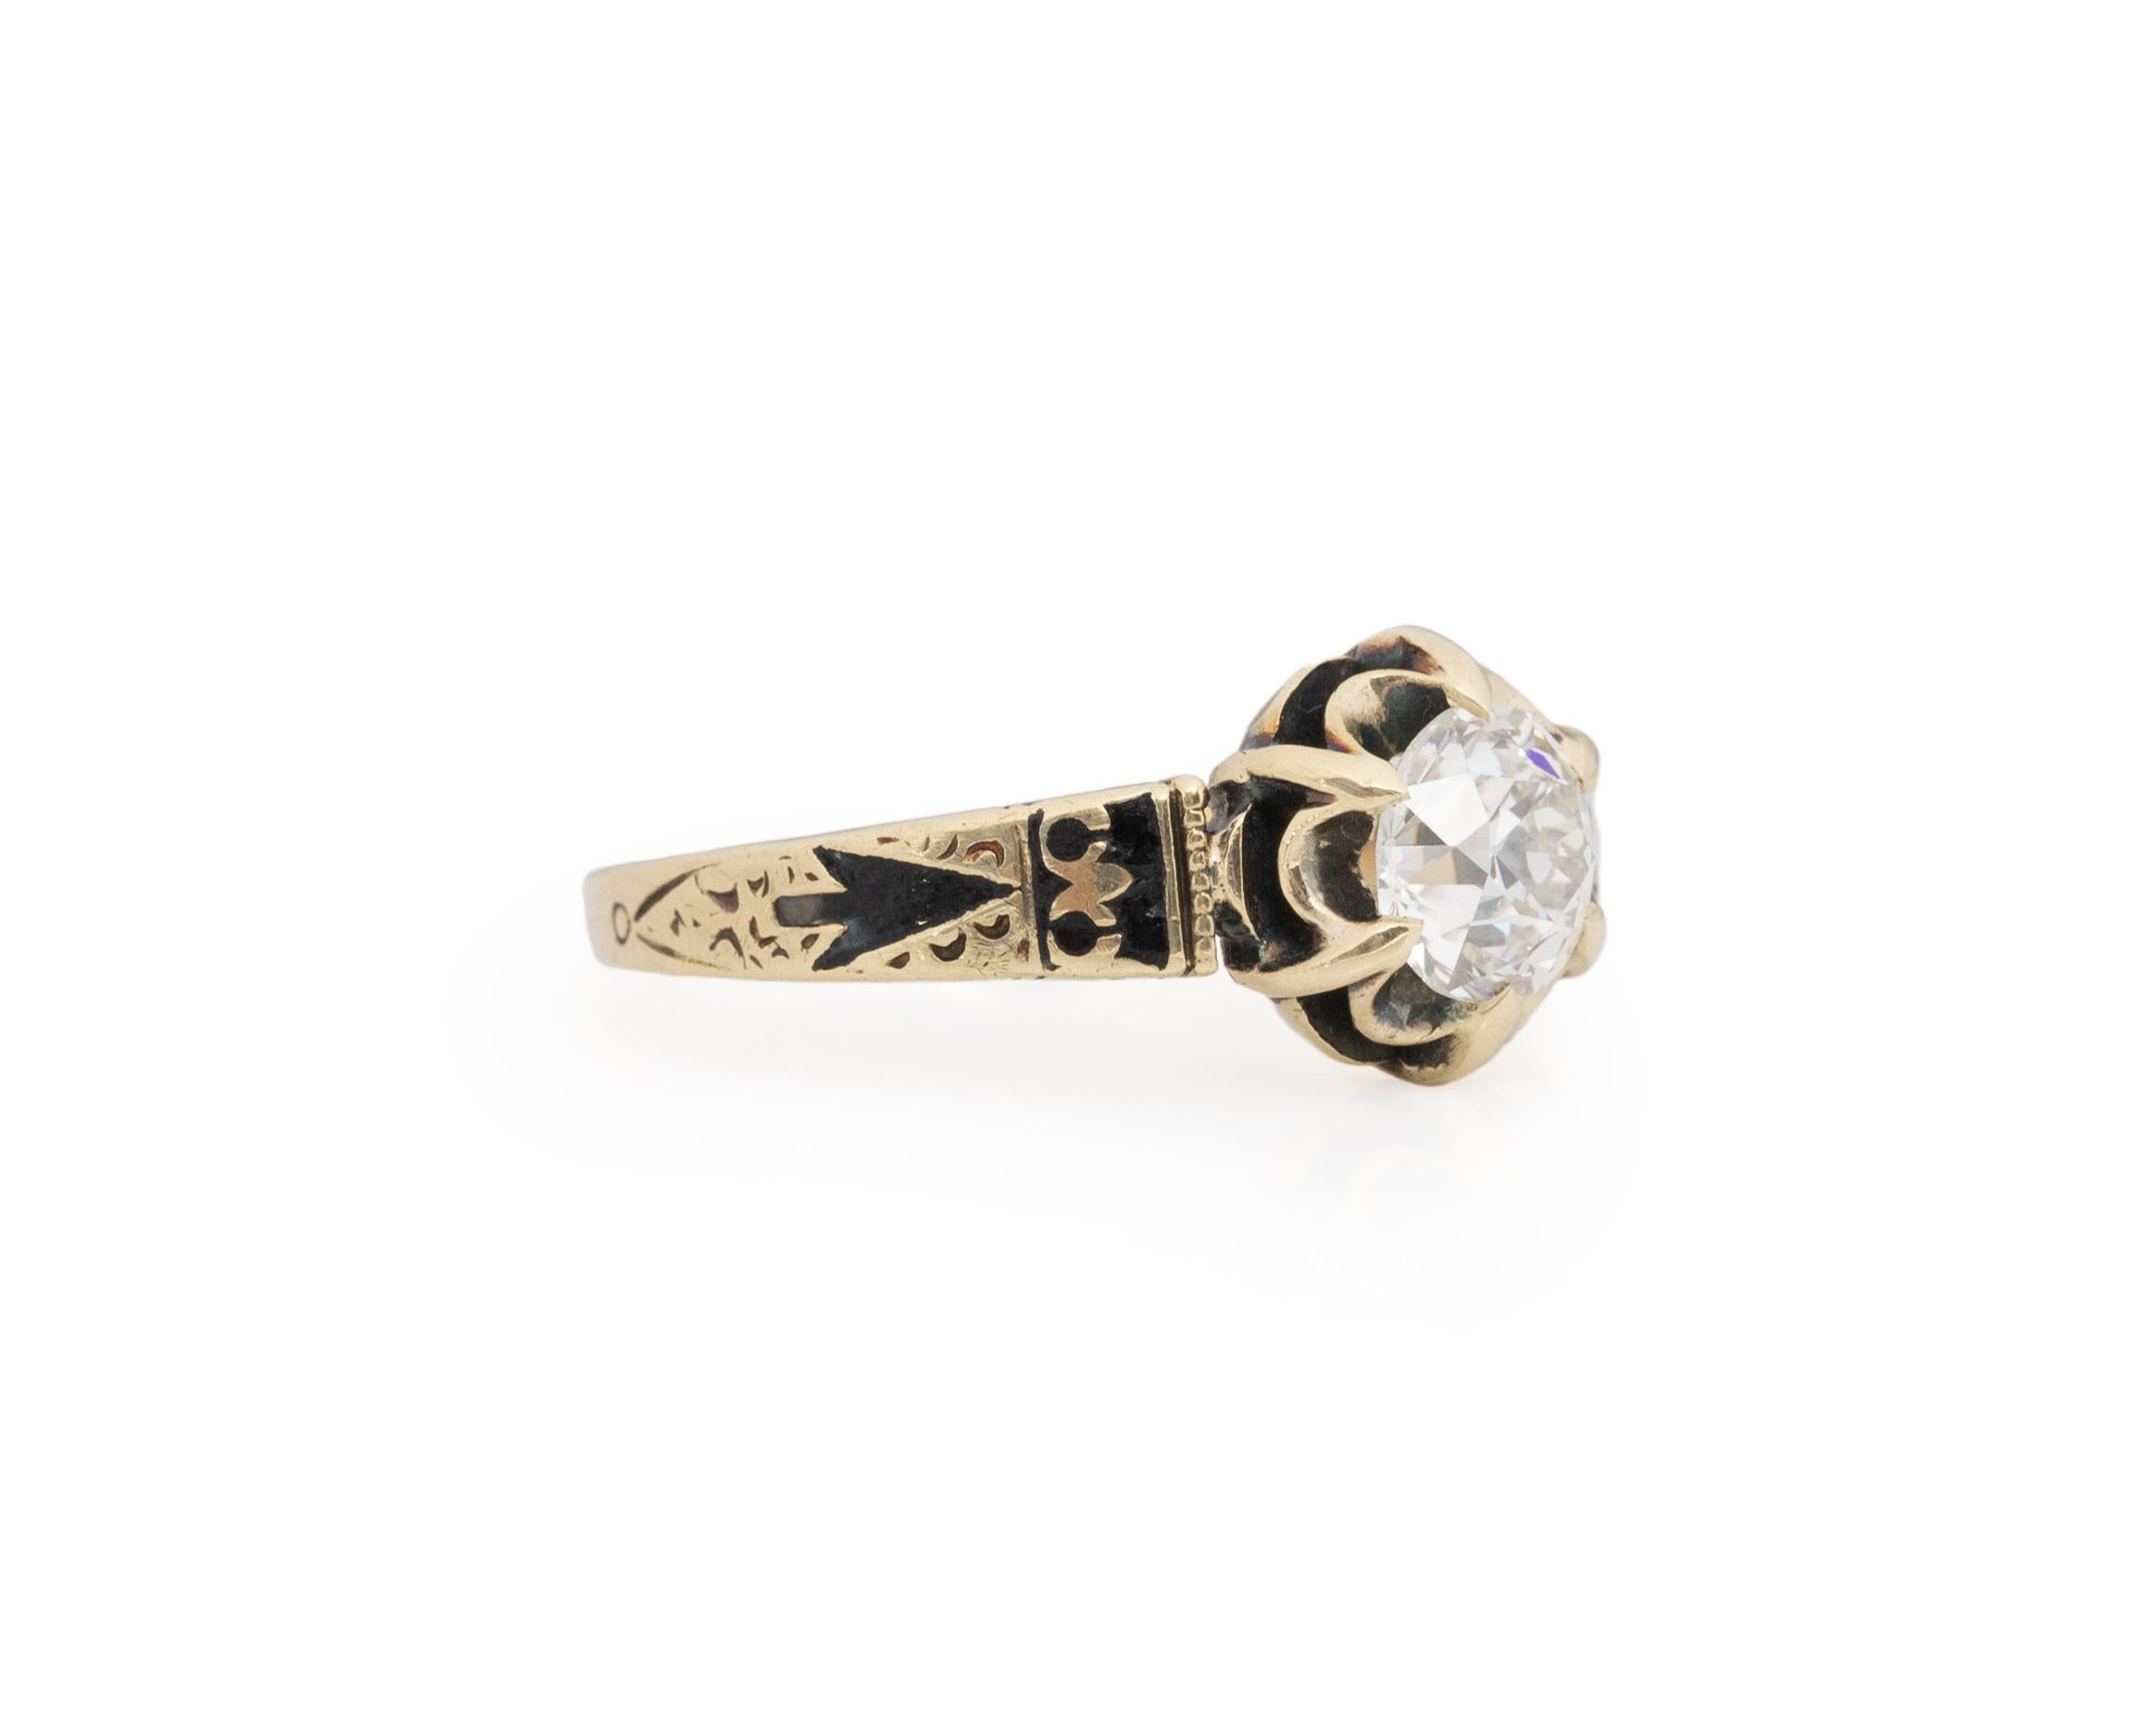 Ring Size: 8.5
Metal Type: 14K Yellow Gold [Hallmarked, and Tested]
Weight: 4.2 grams

Center Diamond Details:
GIA LAB REPORT #: 6223745891
Weight: 1.03ct
Cut: Old European brilliant
Color: I
Clarity: SI1
Measurements: 6.36mm x 6.18mm x